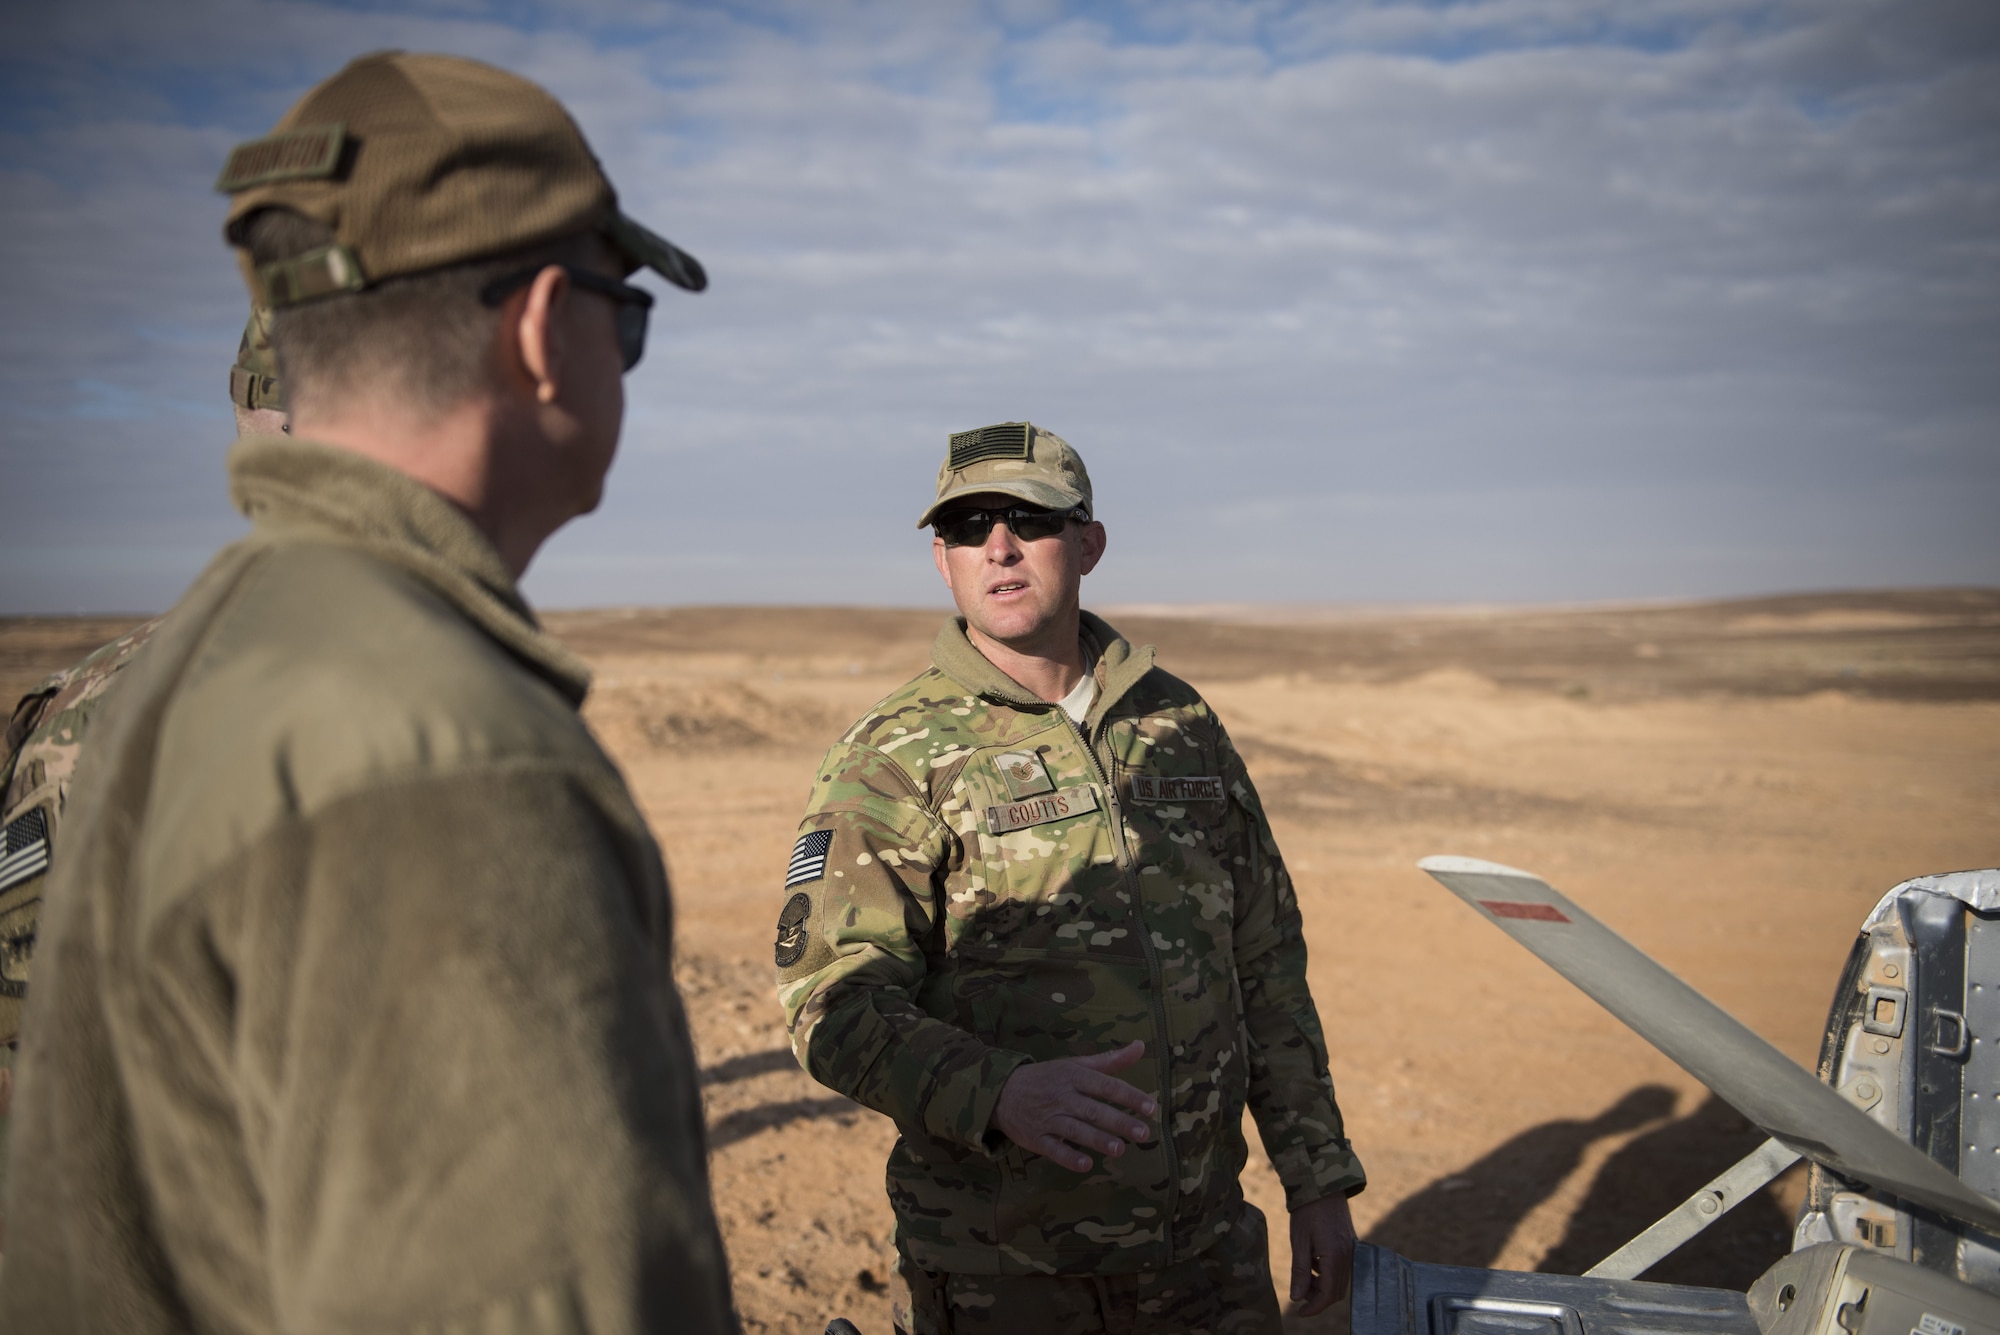 Tech Sgt. Matthew Coutts, assigned to the 332d Expeditionary Security Forces Squadron, demonstrates the capabilities of the Raven B Digital Data Link drone for Brig. Gen. Kyle Robinson, 332d Air Expeditionary Wing commander, Jan. 24, 2018 in Southwest Asia. Prior to deployment, selected Security Forces members received specialized training on maintenance and operation of the system. (U.S. Air Force photo by Staff Sgt. Joshua Kleinholz)